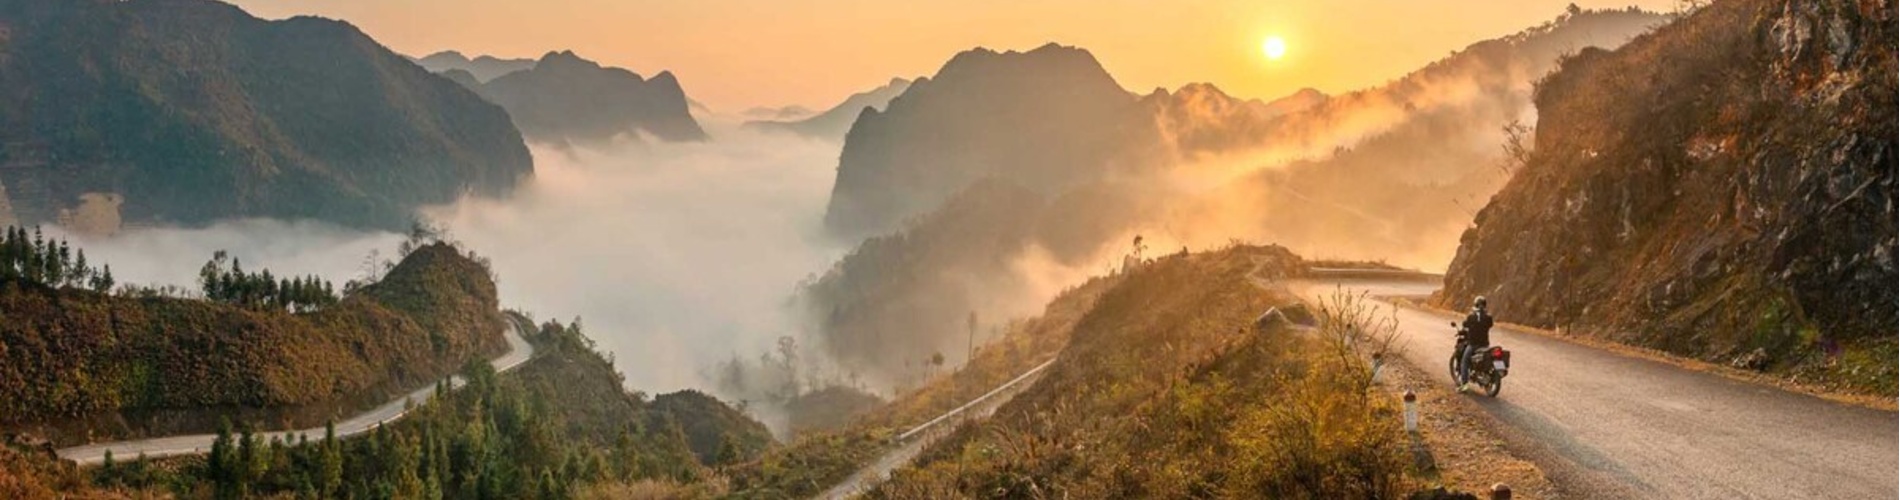 Discovering the most beautiful sights in Ha Giang